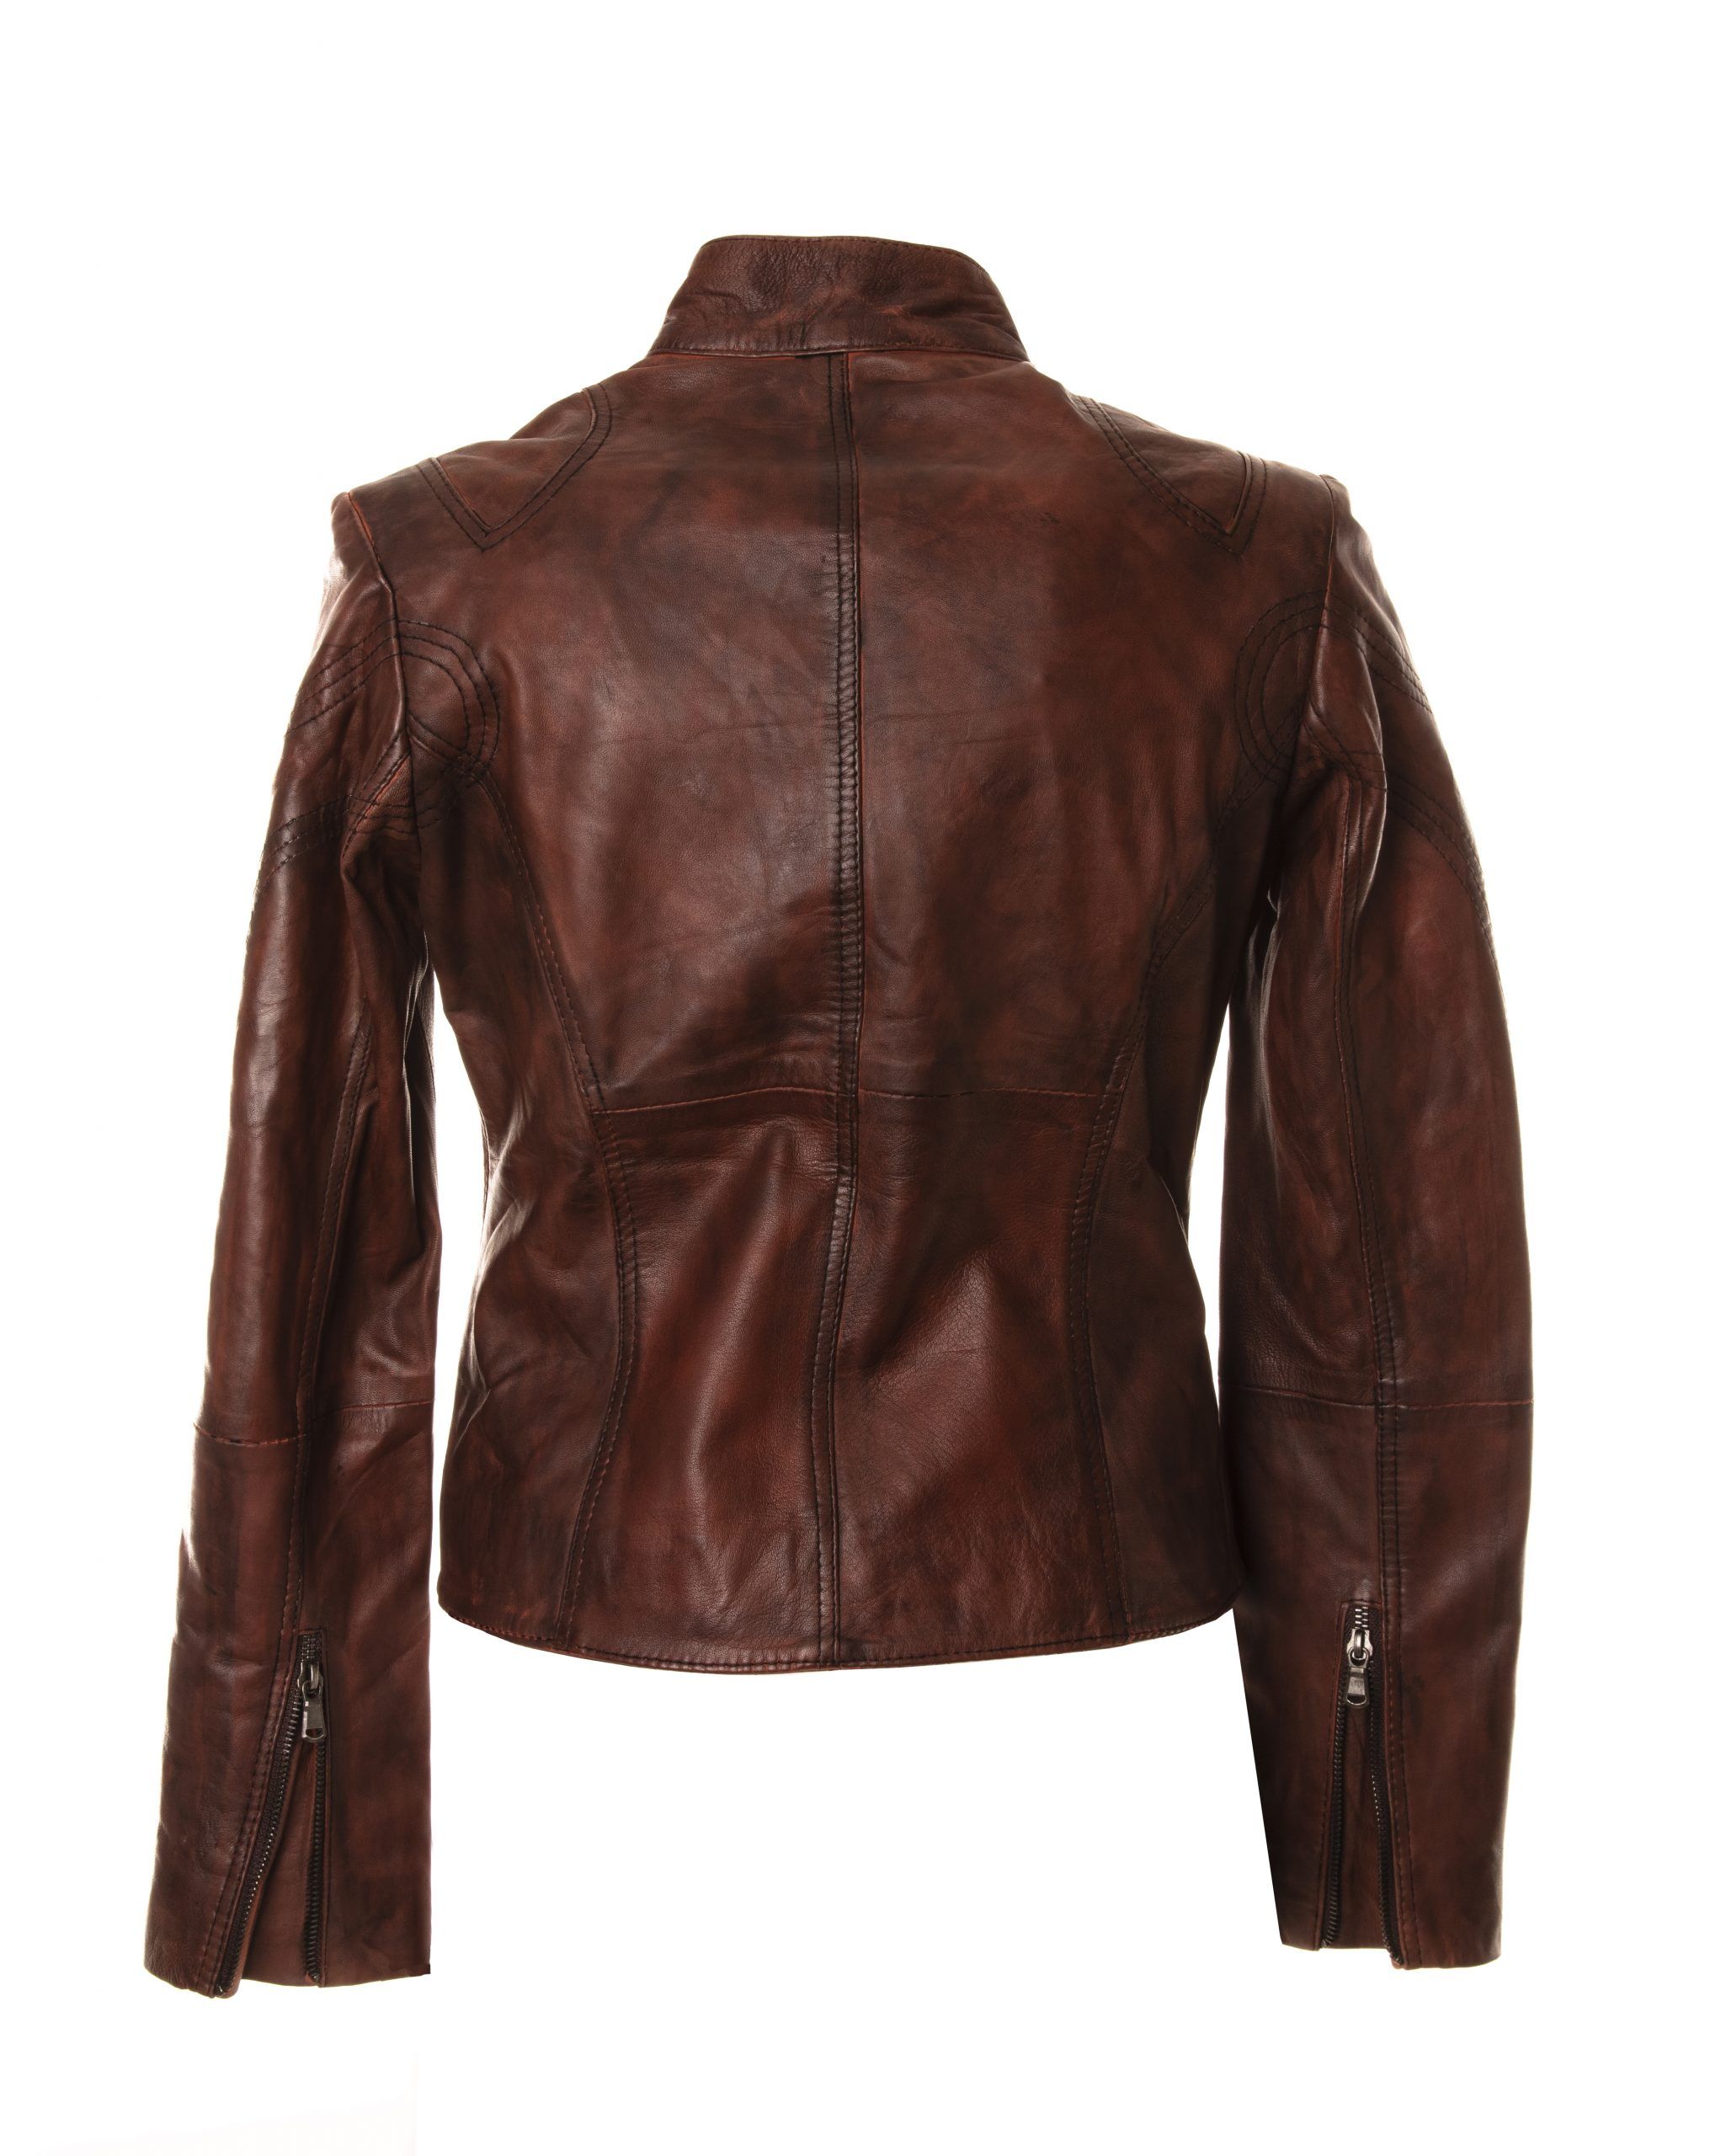 The Sun Beam - Second Skin Leather and Sheepskin Clothing